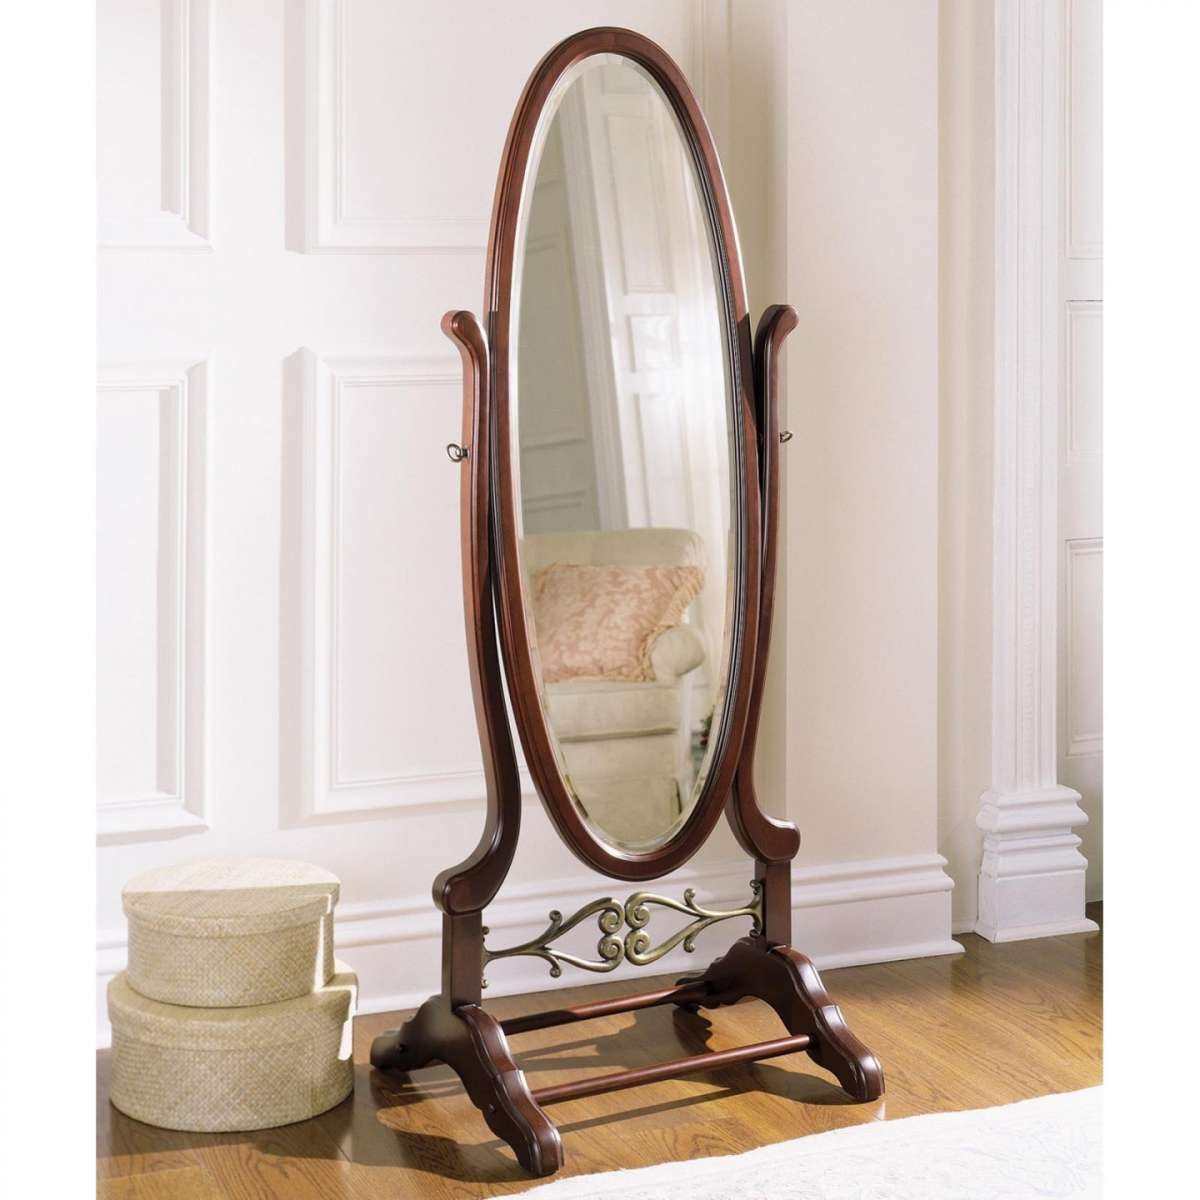 Home Selections Small Full Length Wooden Freestanding Cheval Mirror 35x110cm White 